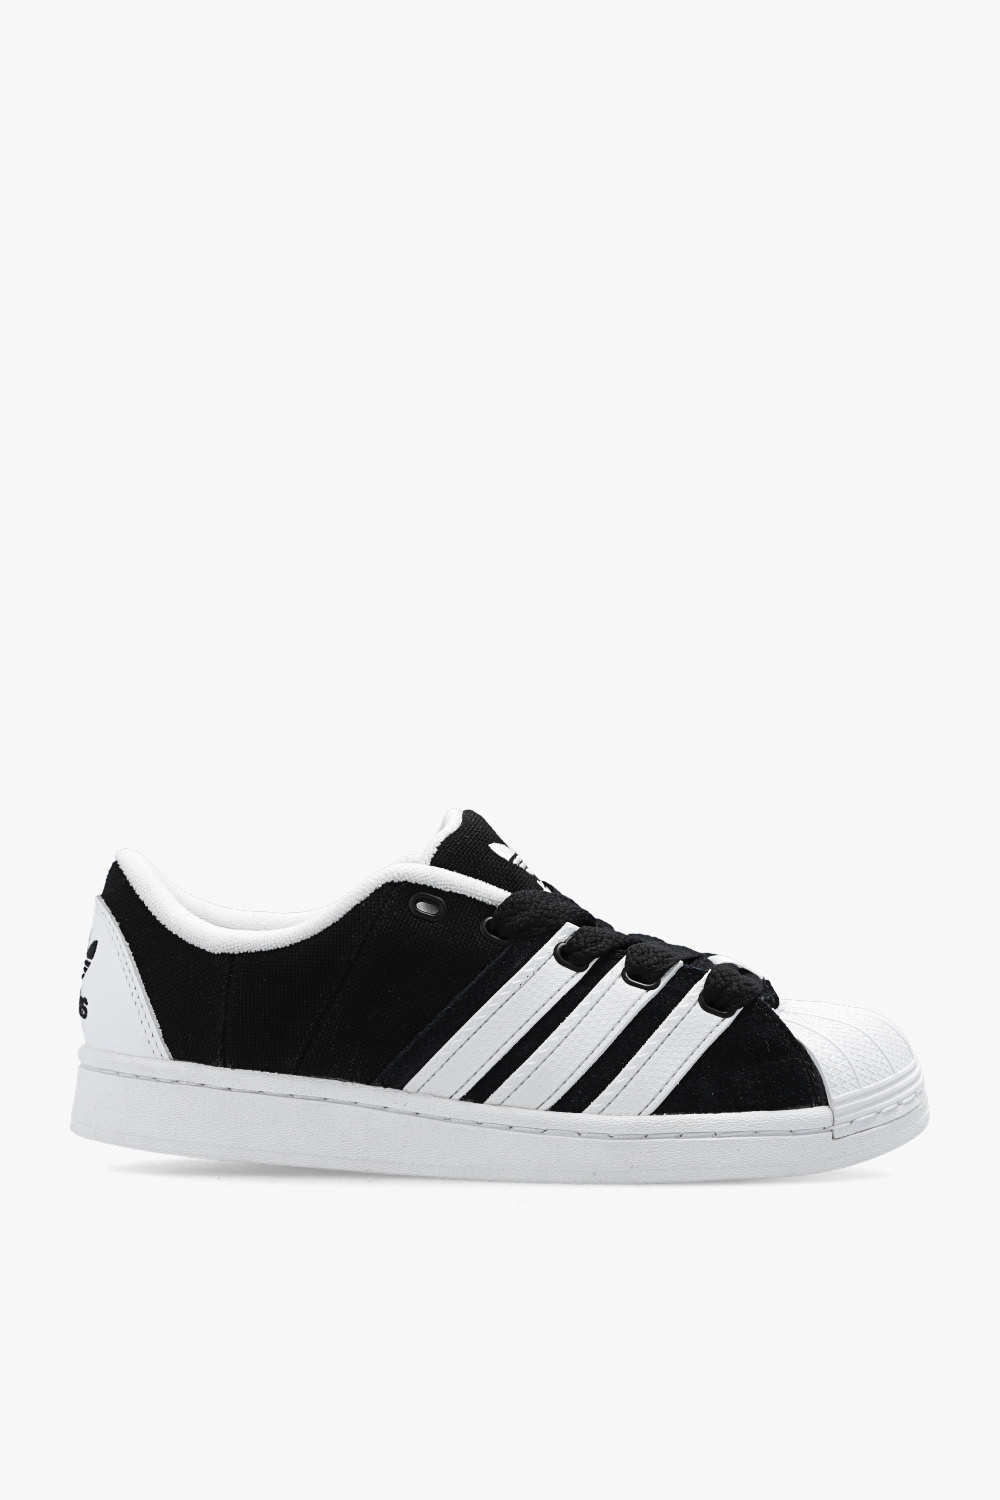 ADIDAS Originals 'SUPERSTAR SUPERMODIFIED' sneakers | StclaircomoShops |  adidas info poster dress ideas for adults girls | Men's Shoes